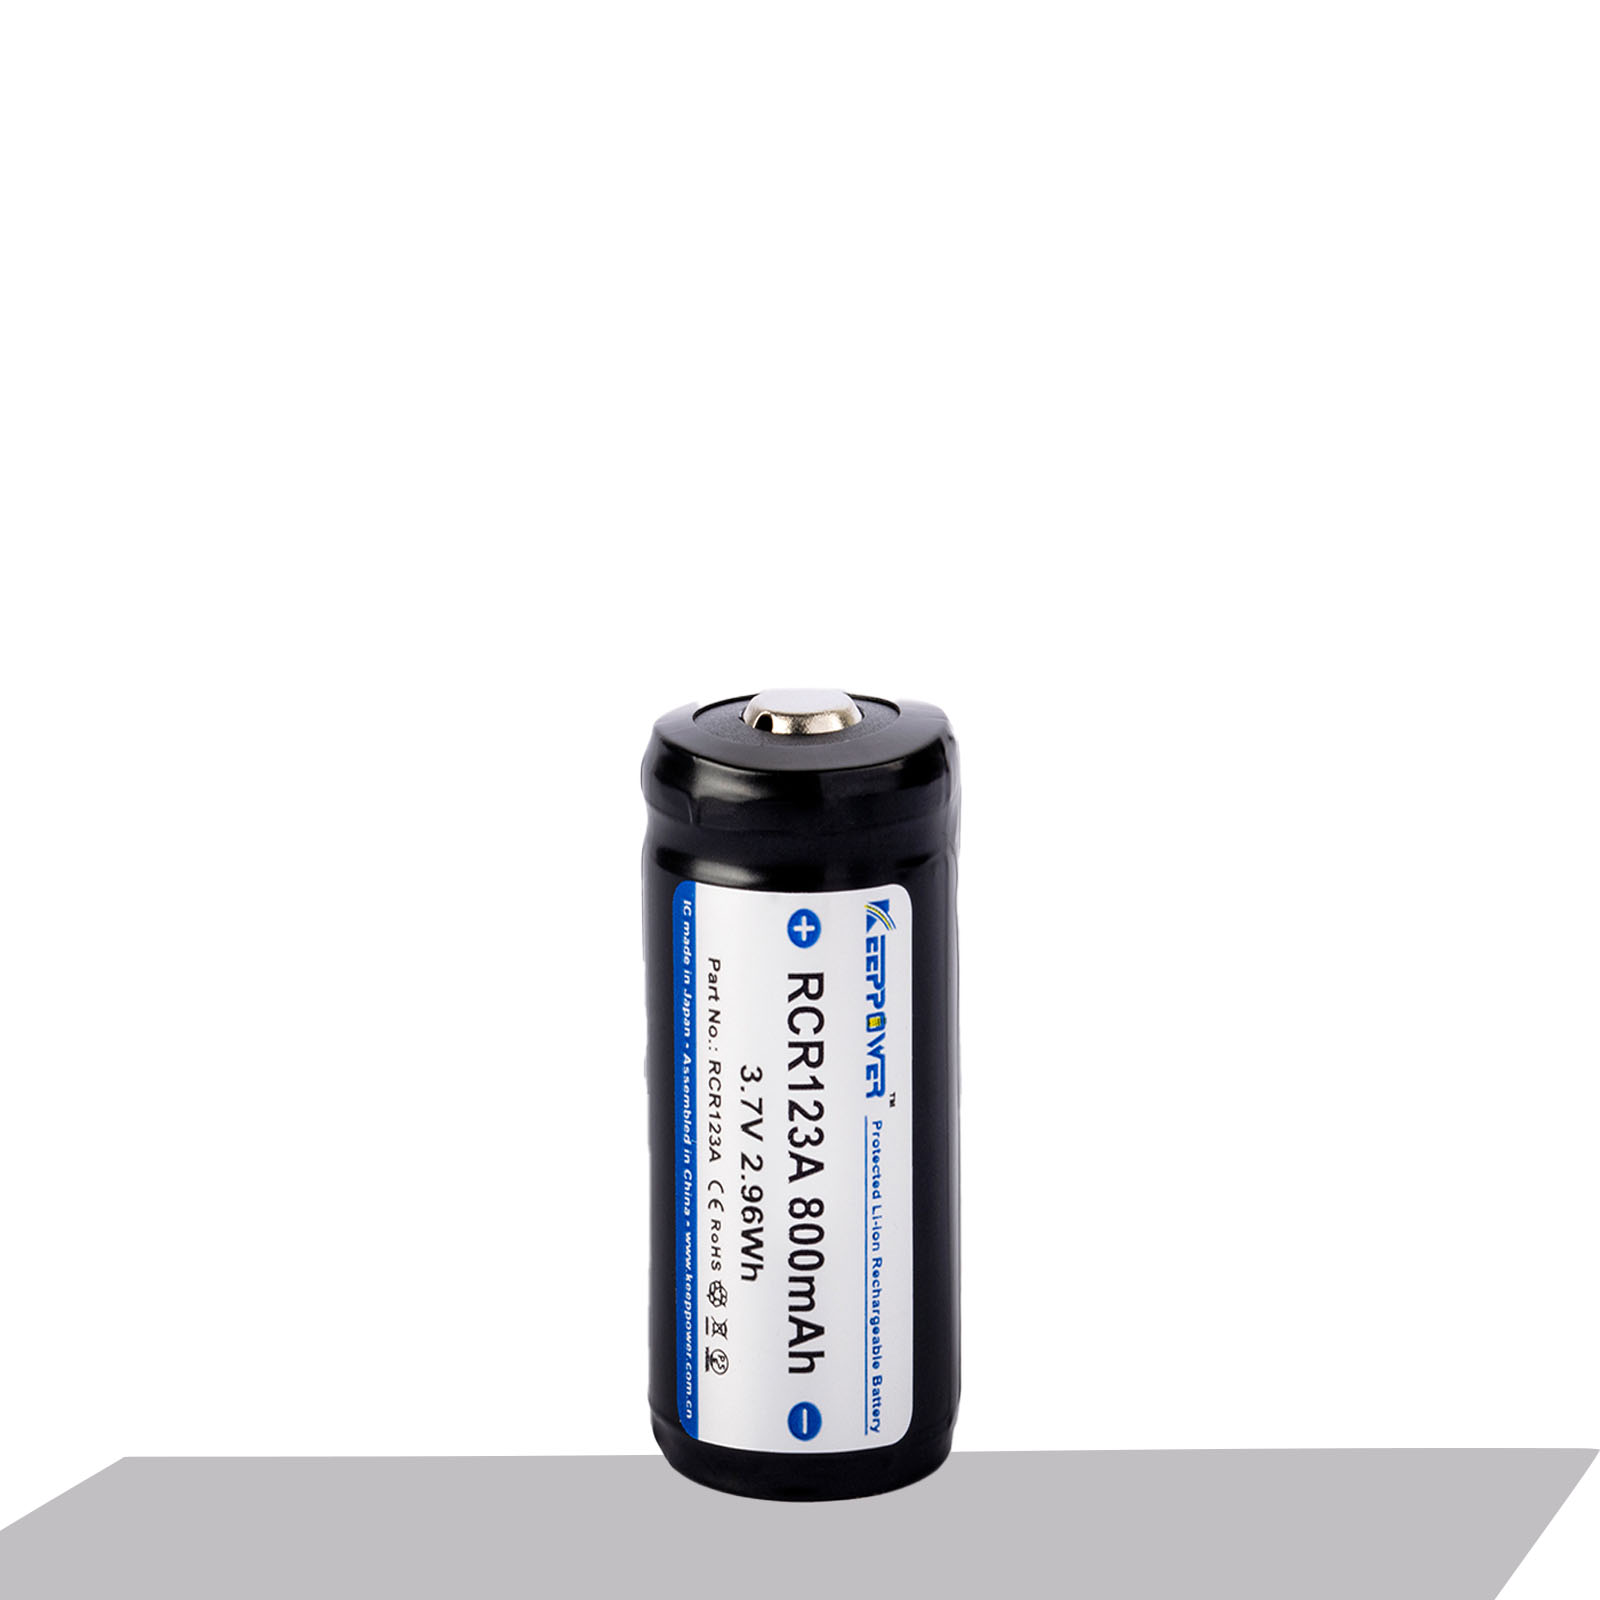 Rechargeable battery KEEPPOWER RCR123A 800 mAh (Li-Ion) with